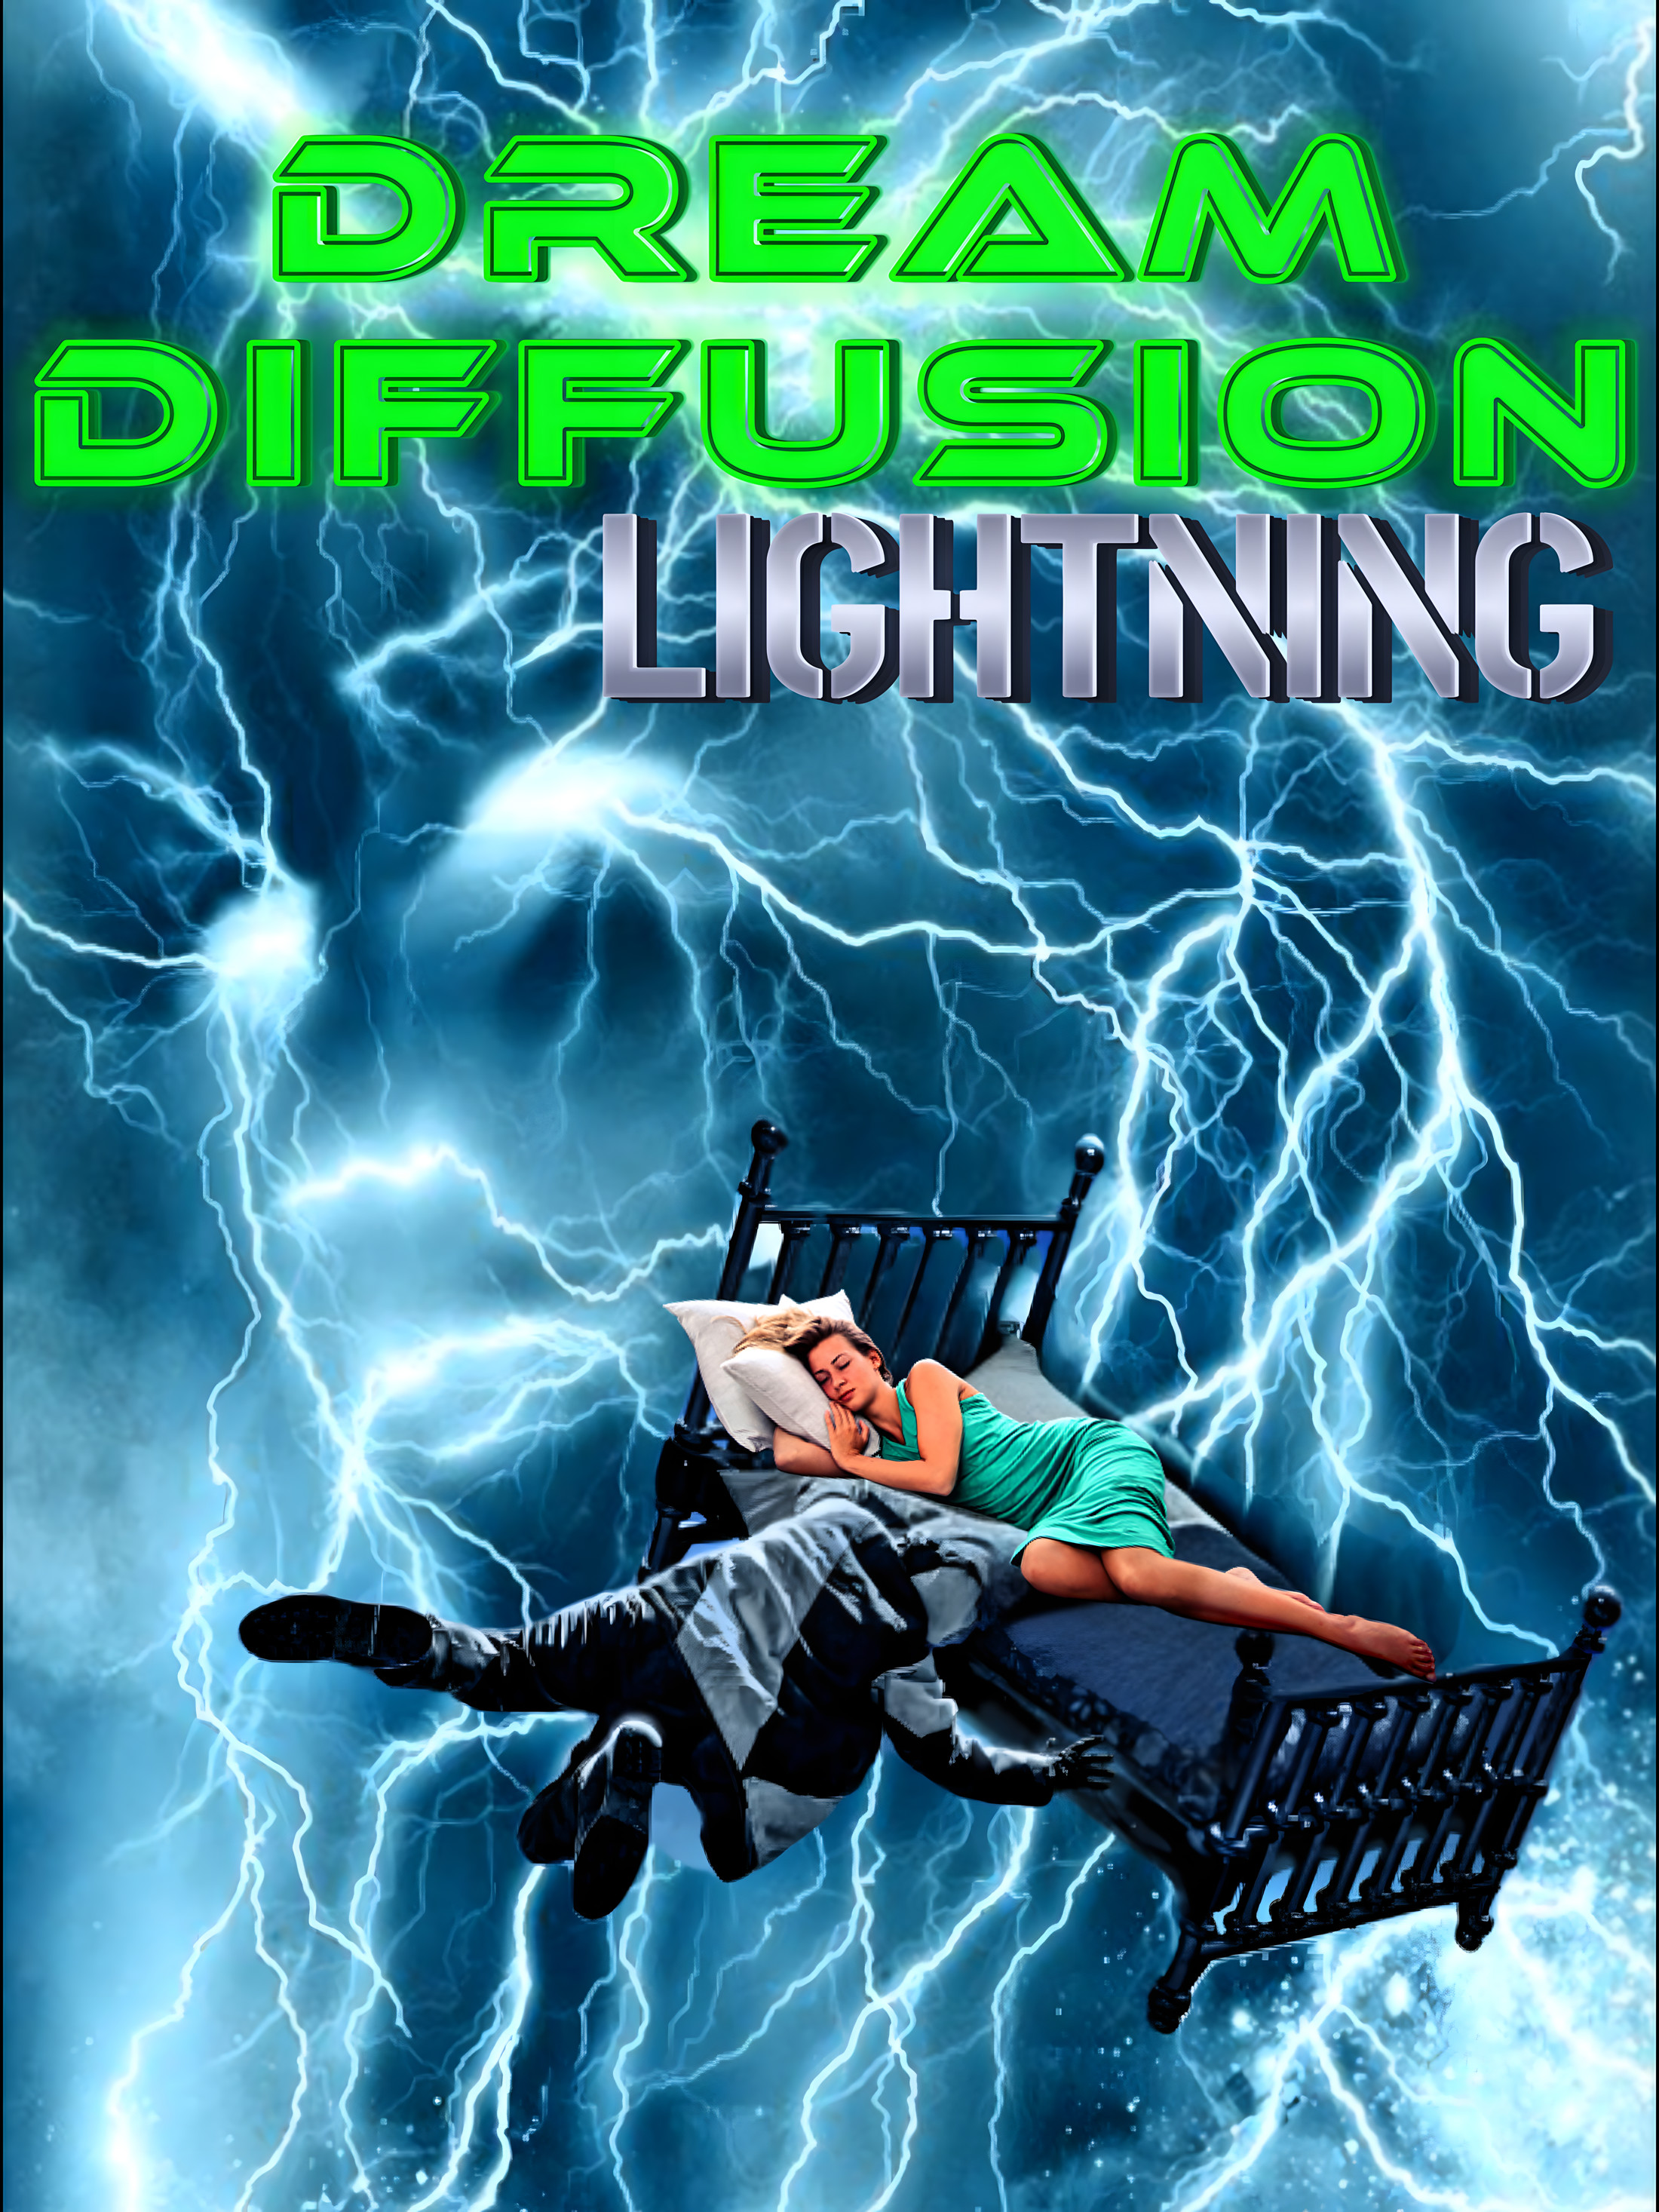 1girl in bed dreaming, sleeping, album cover, caustics, falling from sky , cover, pillows electricity, lightning face, lon...